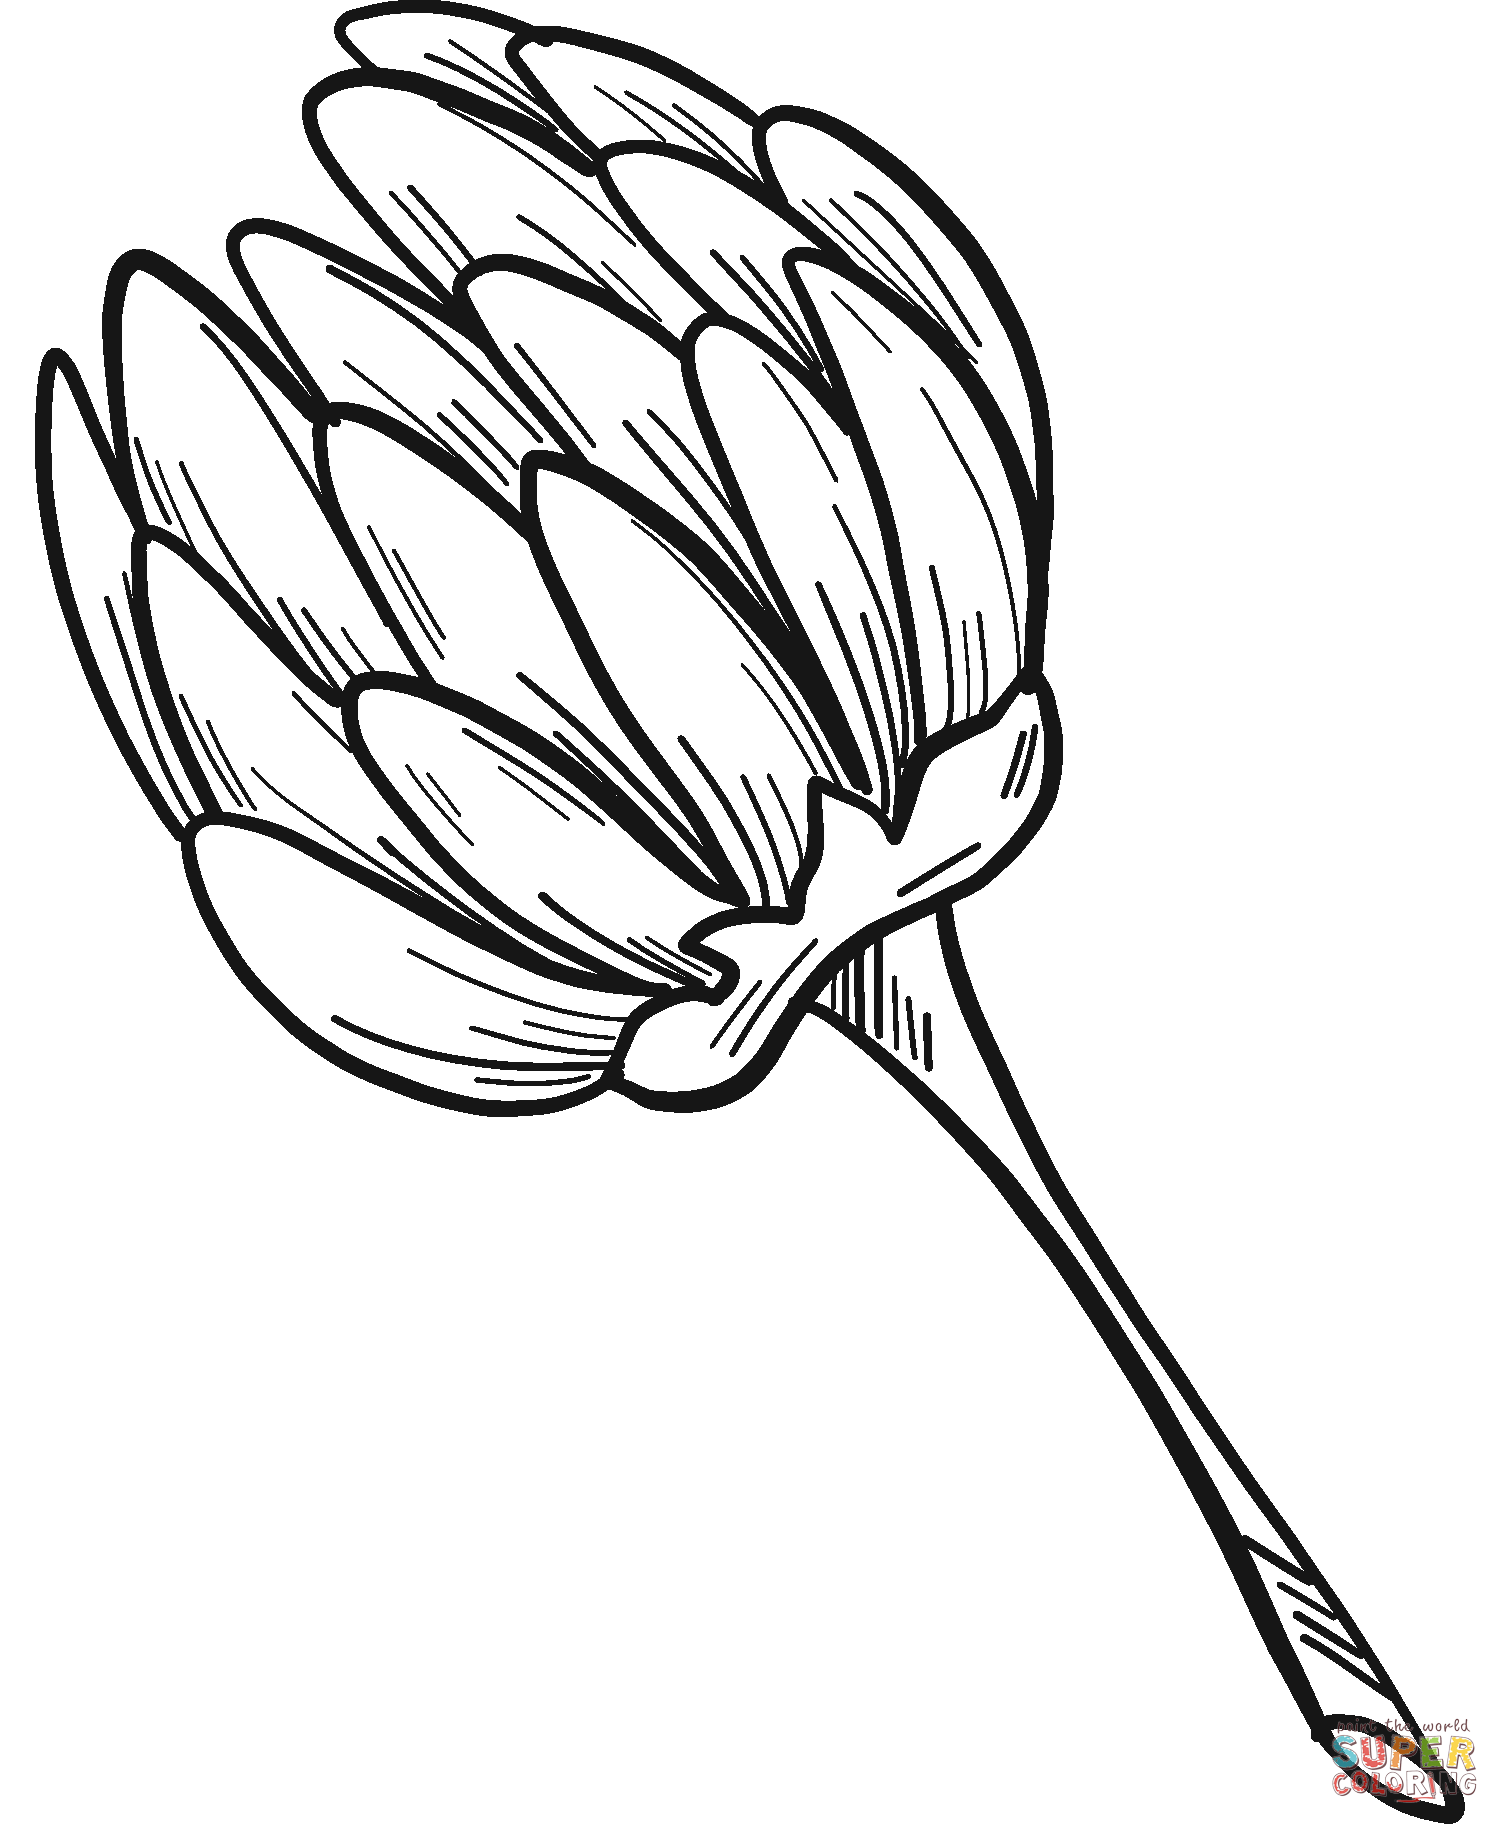 Clover flower coloring page free printable coloring pages